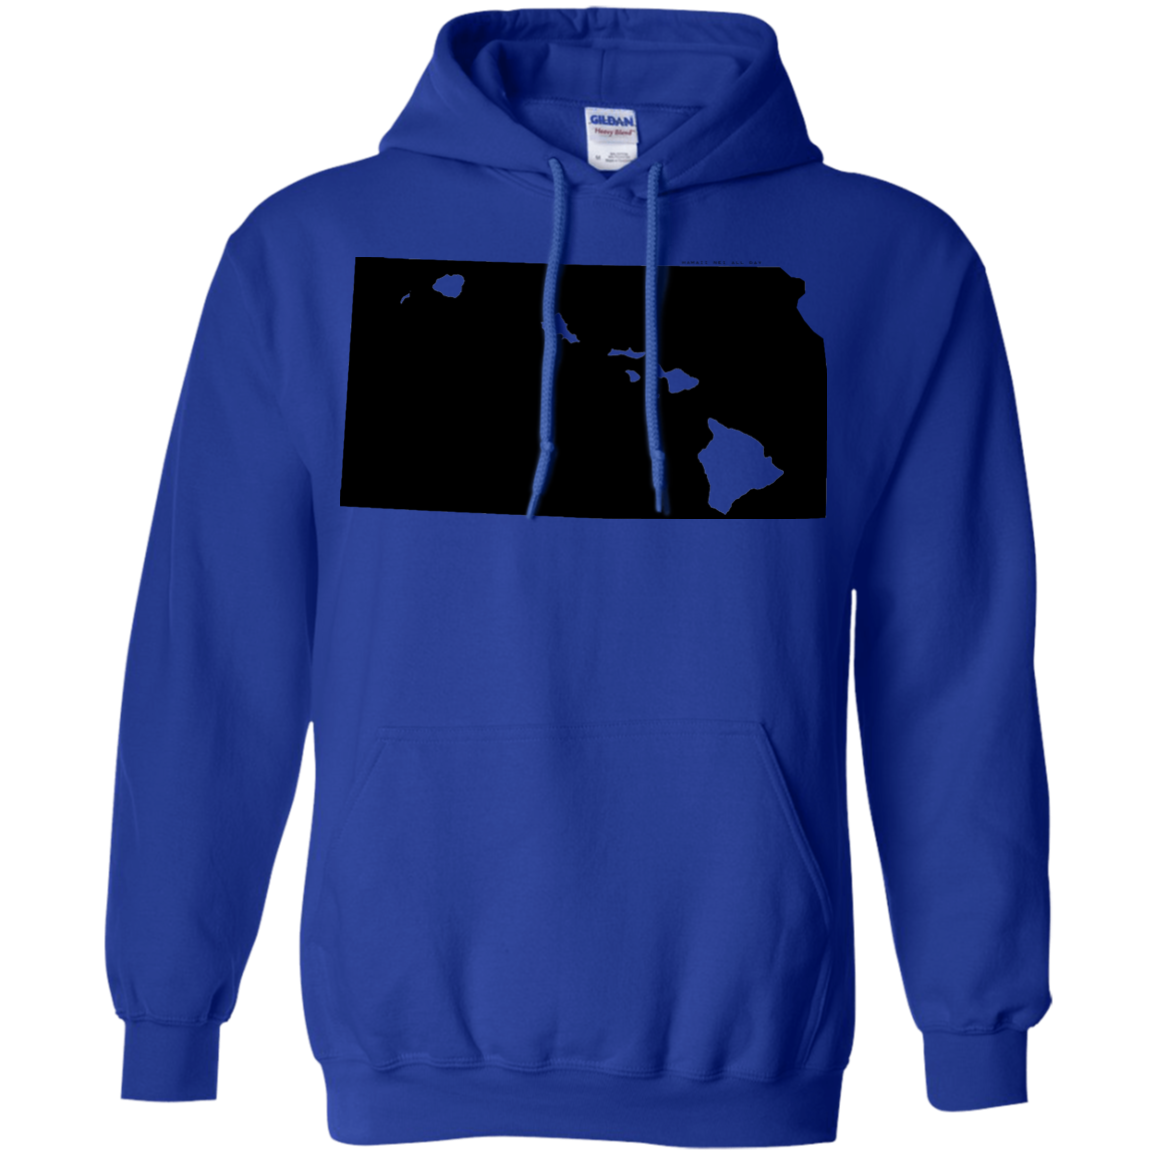 Living in Kansas with Hawaii Roots Pullover Hoodie 8 oz., Sweatshirts, Hawaii Nei All Day